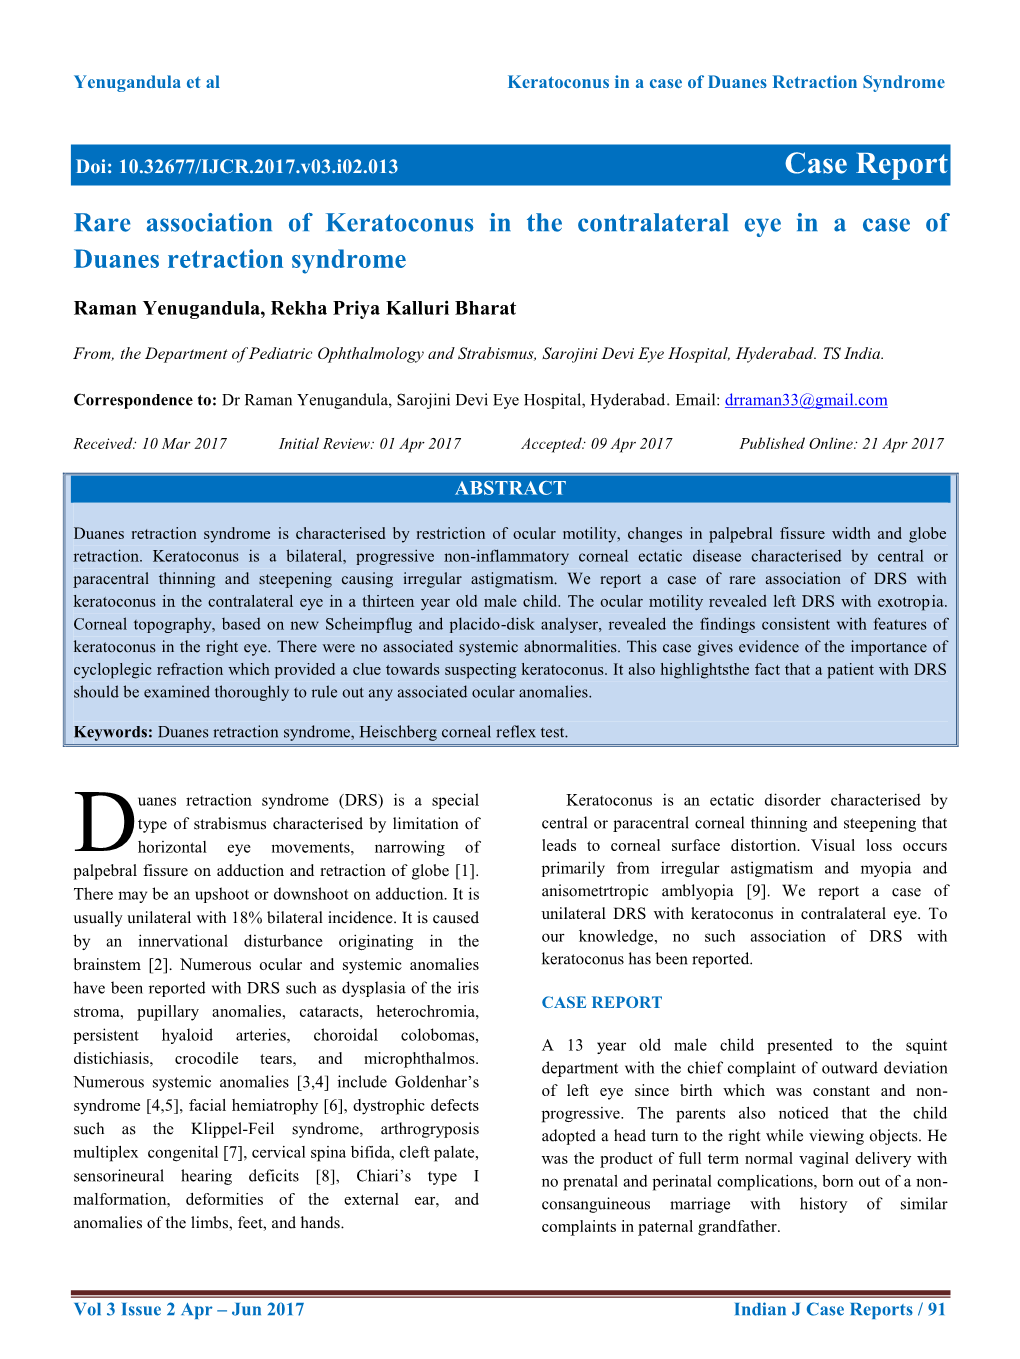 Case Report Rare Association of Keratoconus in the Contralateral Eye in a Case of Duanes Retraction Syndrome